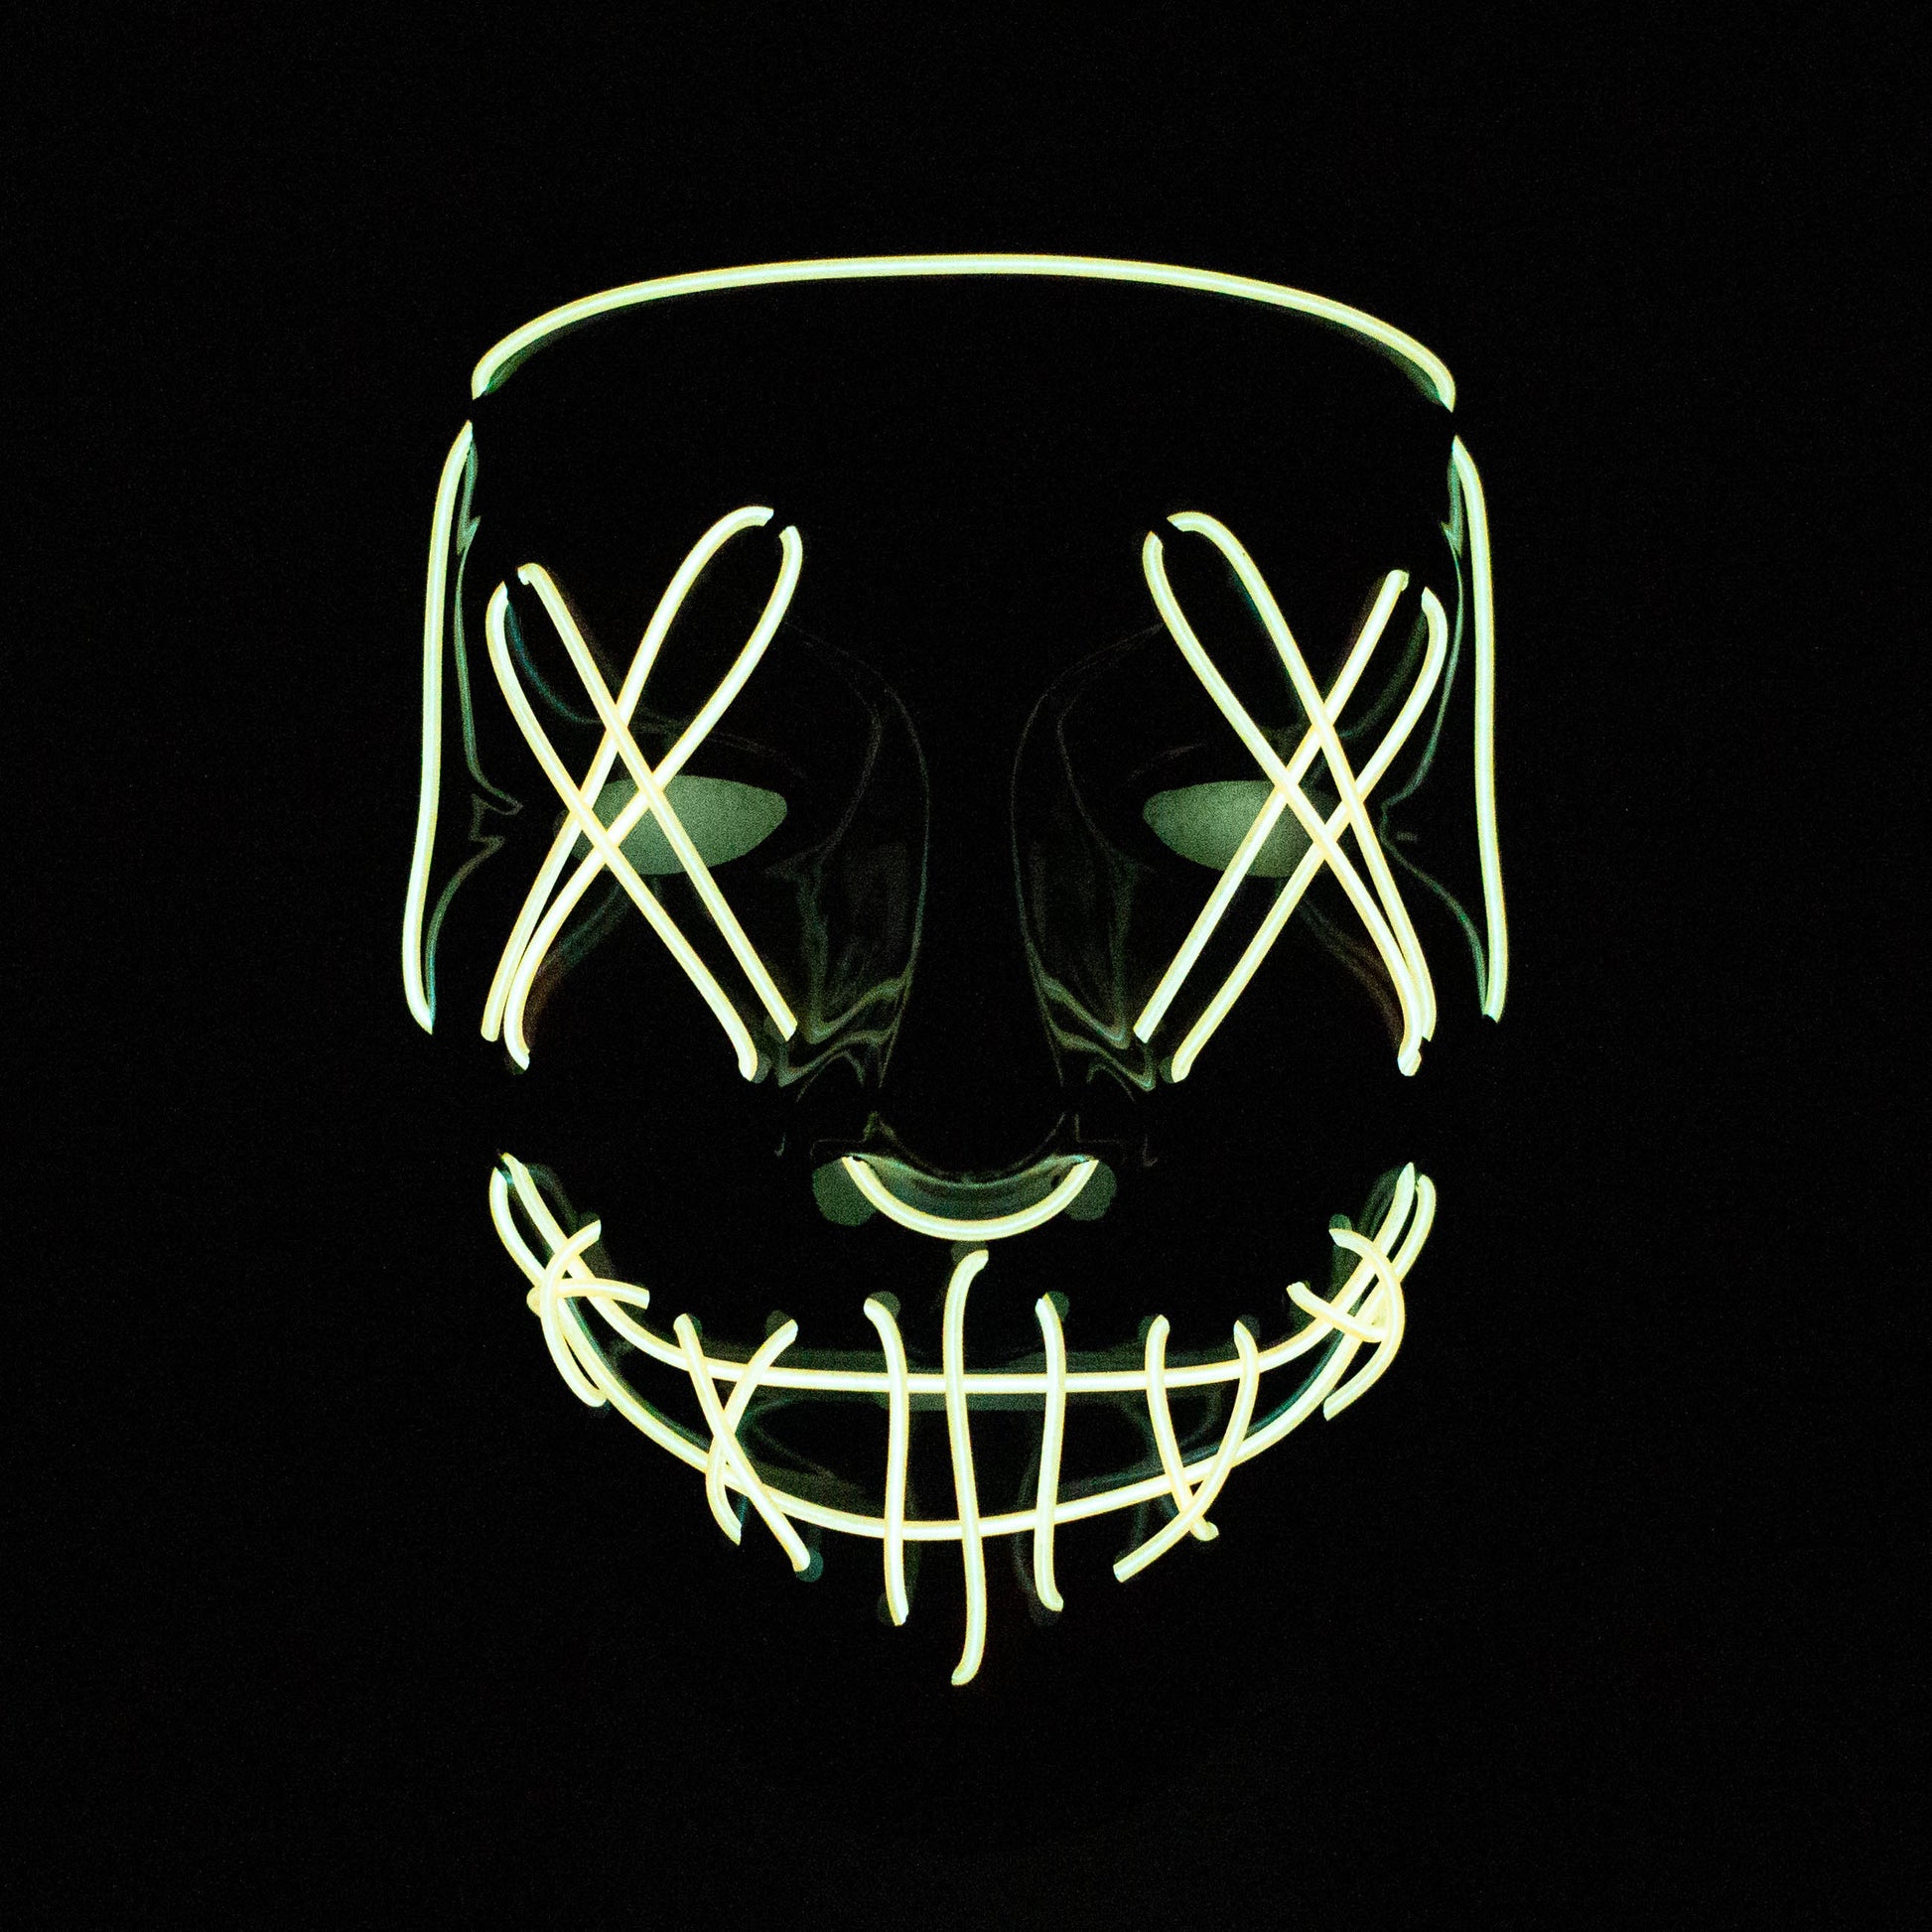 LED Neon Mask for party or Halloween Costume_3